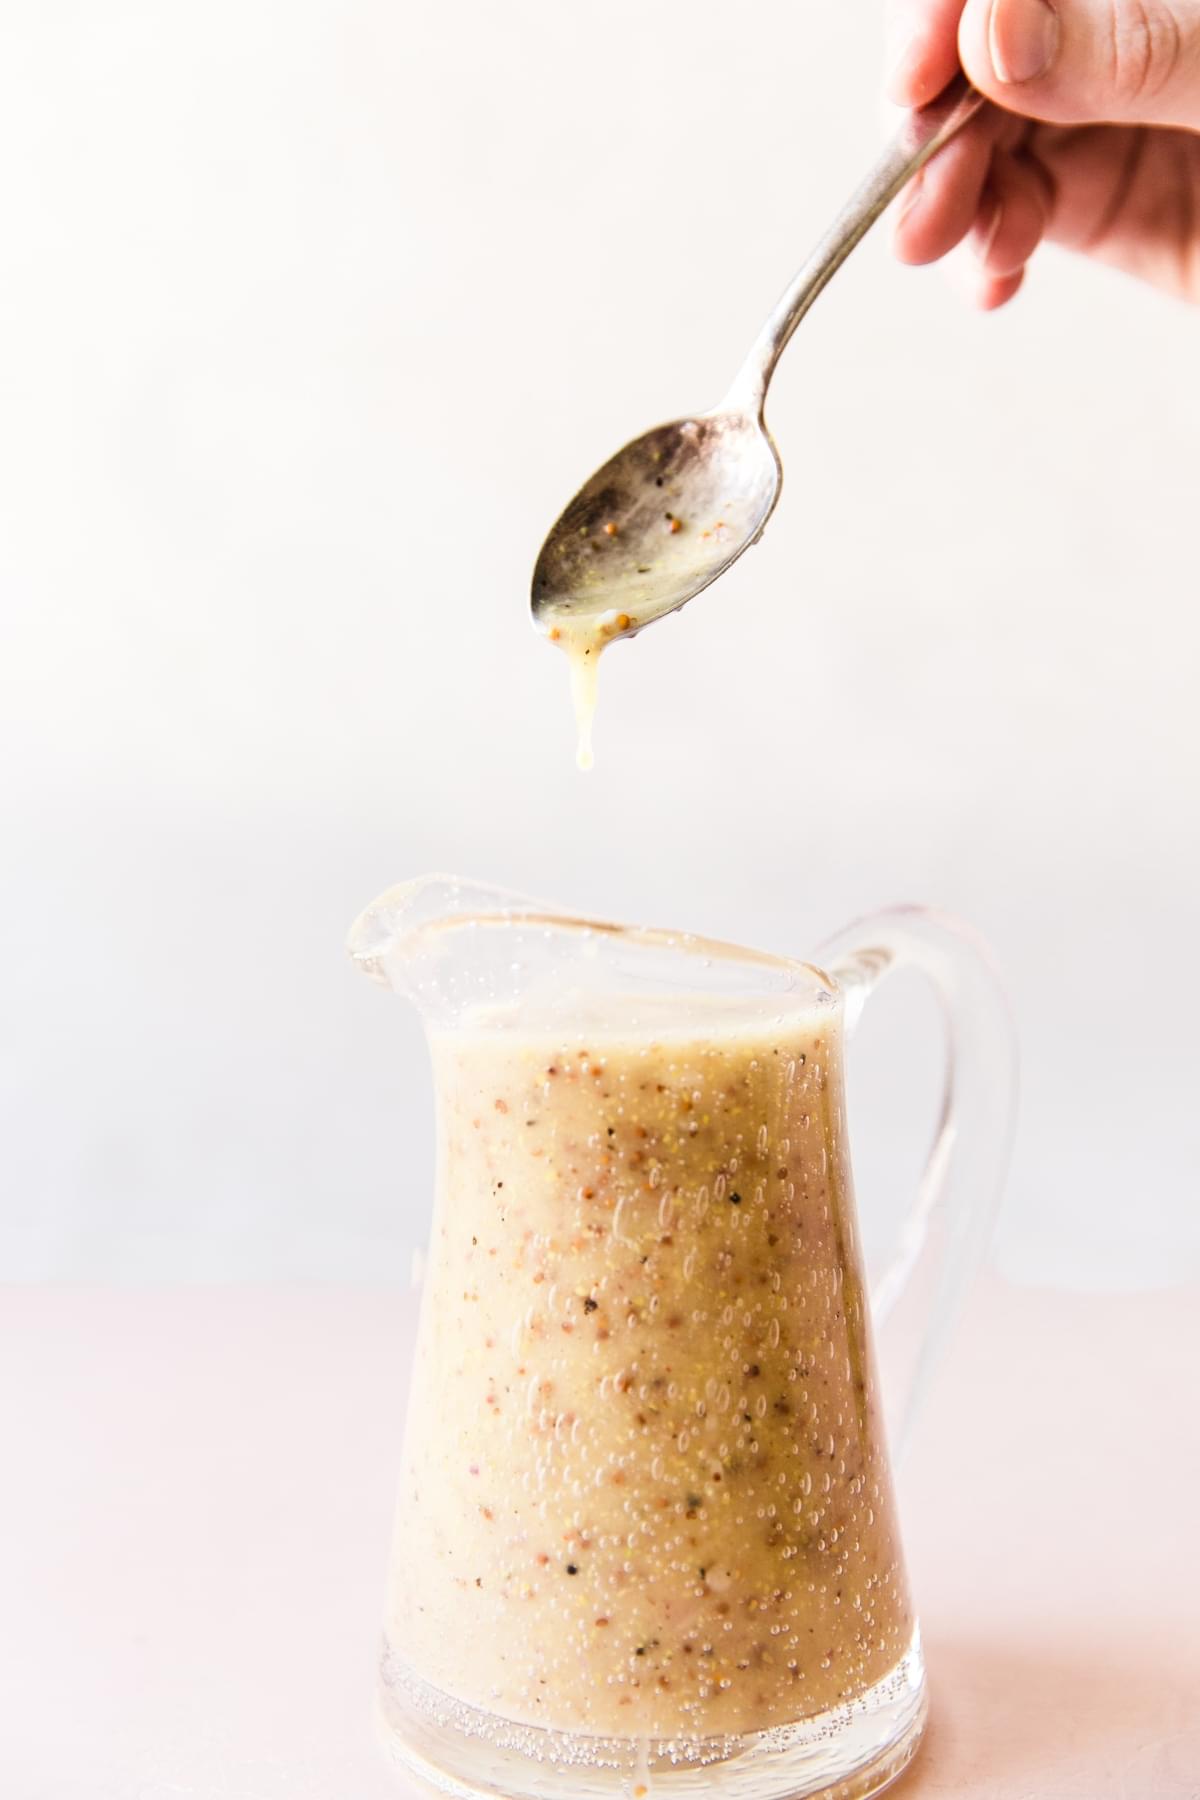 Honey Mustard Salad Dressing dripping off a spoon into a small pitcher